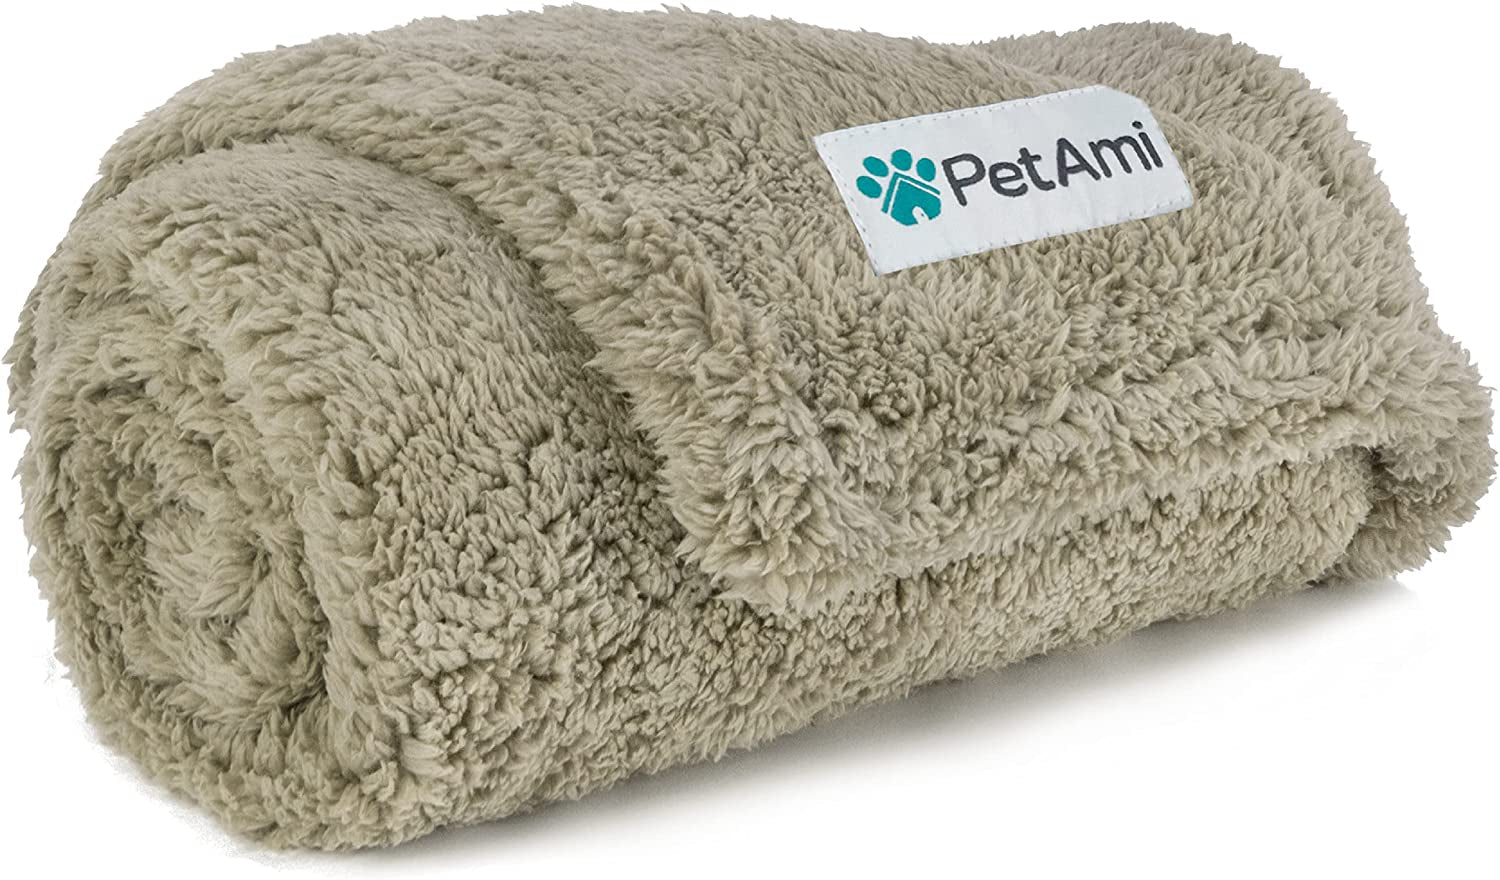 Fluffy Waterproof Dog Blanket for Small Medium Dogs, Soft Warm Pet Sherpa Throw Pee Proof Couch Cover, Reversible Cat Puppy Bed Blanket Sofa Protector, Plush Washable Pad (Taupe Camel, 24X32)